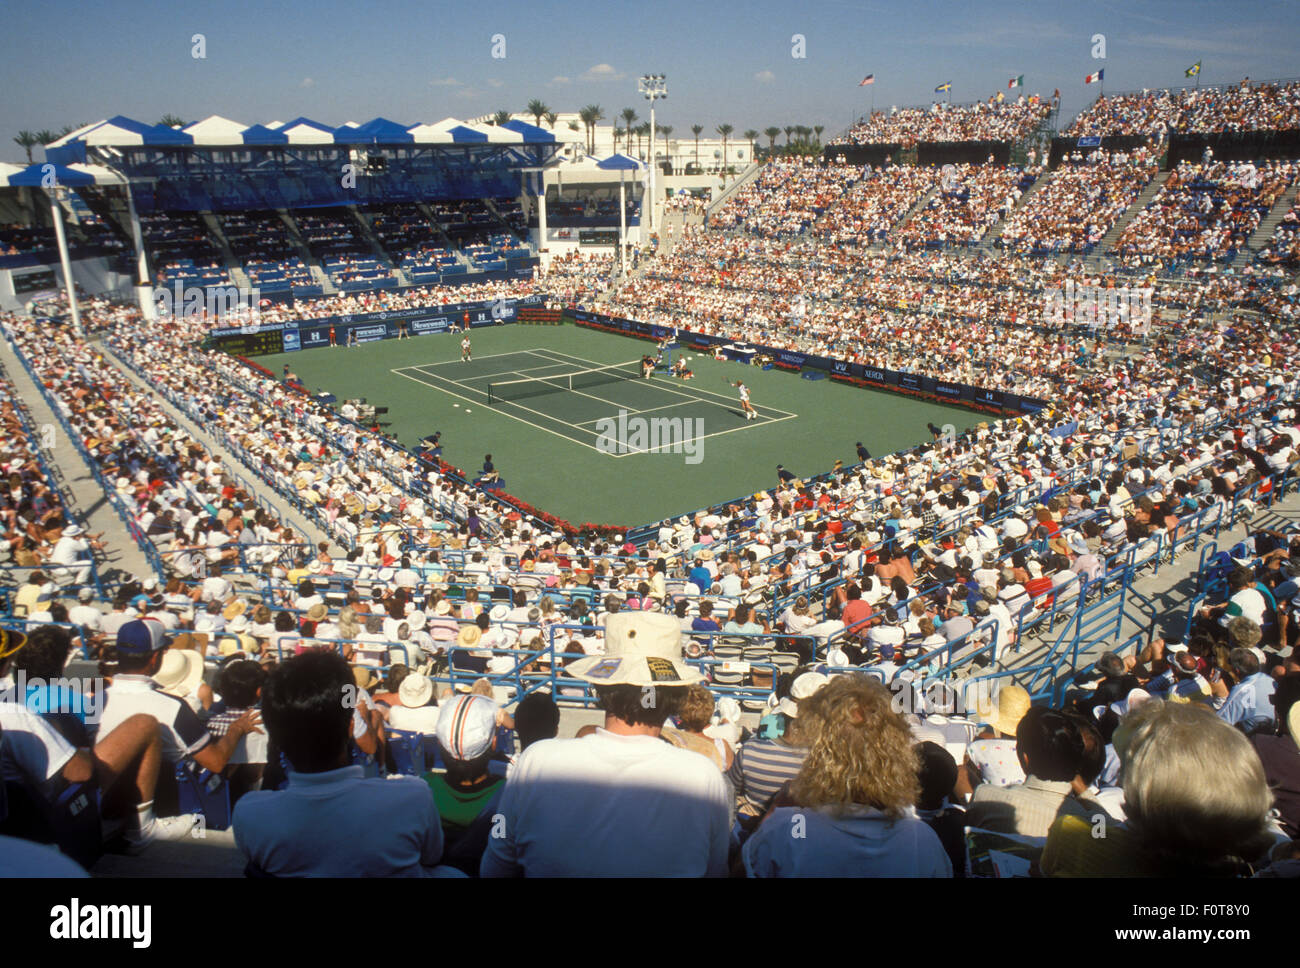 Stadium full of spectators at the Newsweek Champions Cup tournament in Indian Wells, California in March 1988. Stock Photo